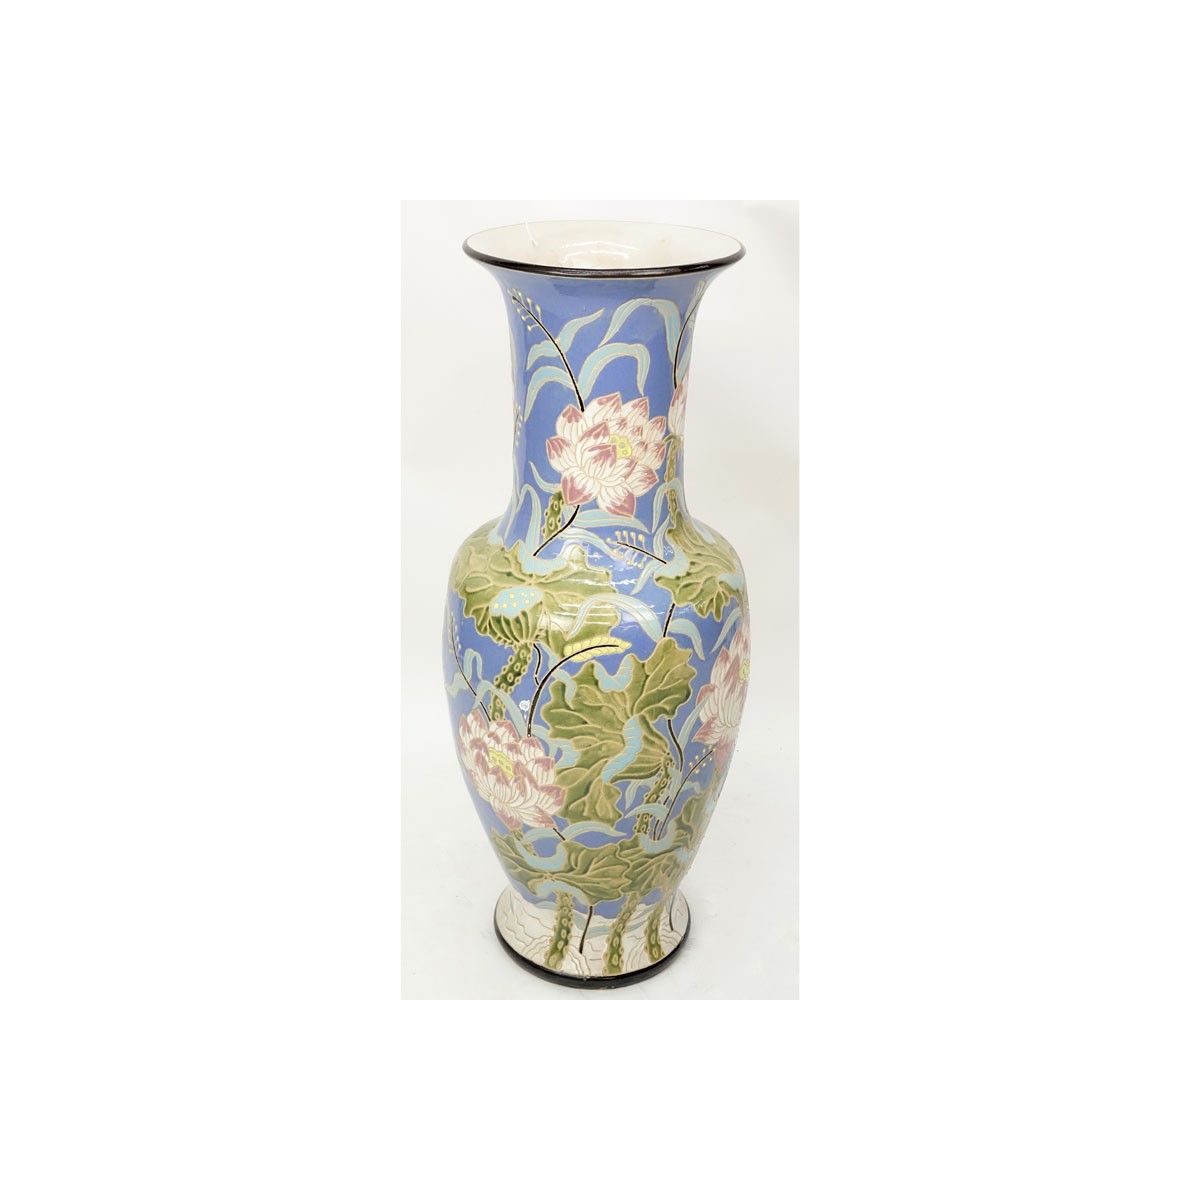 Monumental Majolica Pottery Vase. Features Asian inspired lotus flower motif on blue ground. Unsign